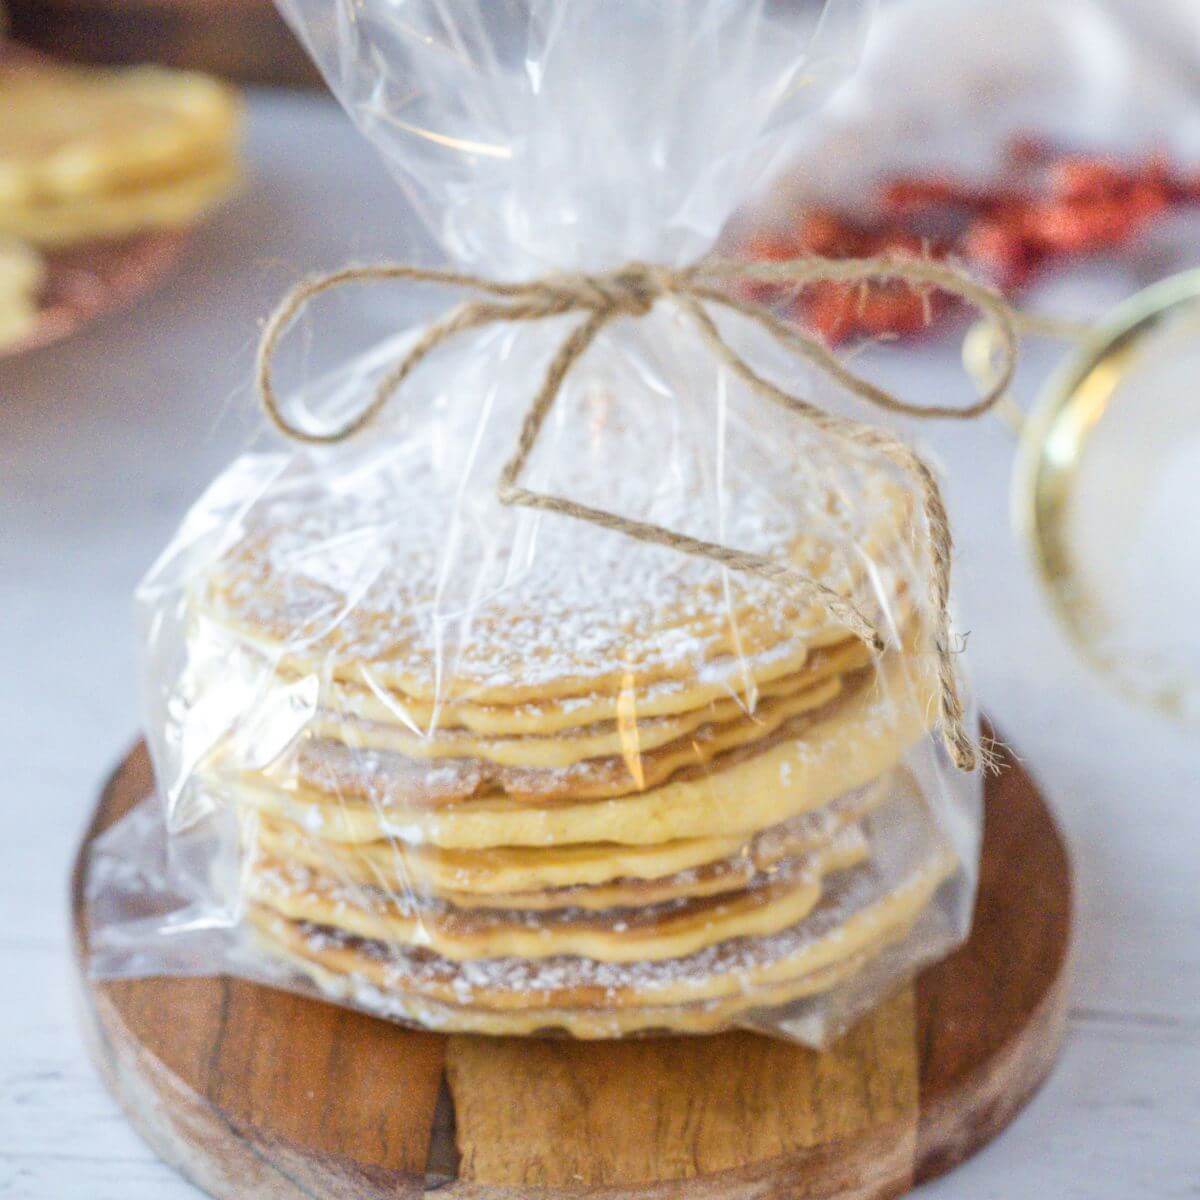 A clear giftwrapped tower of Pizzelles rests on wooden display dish.